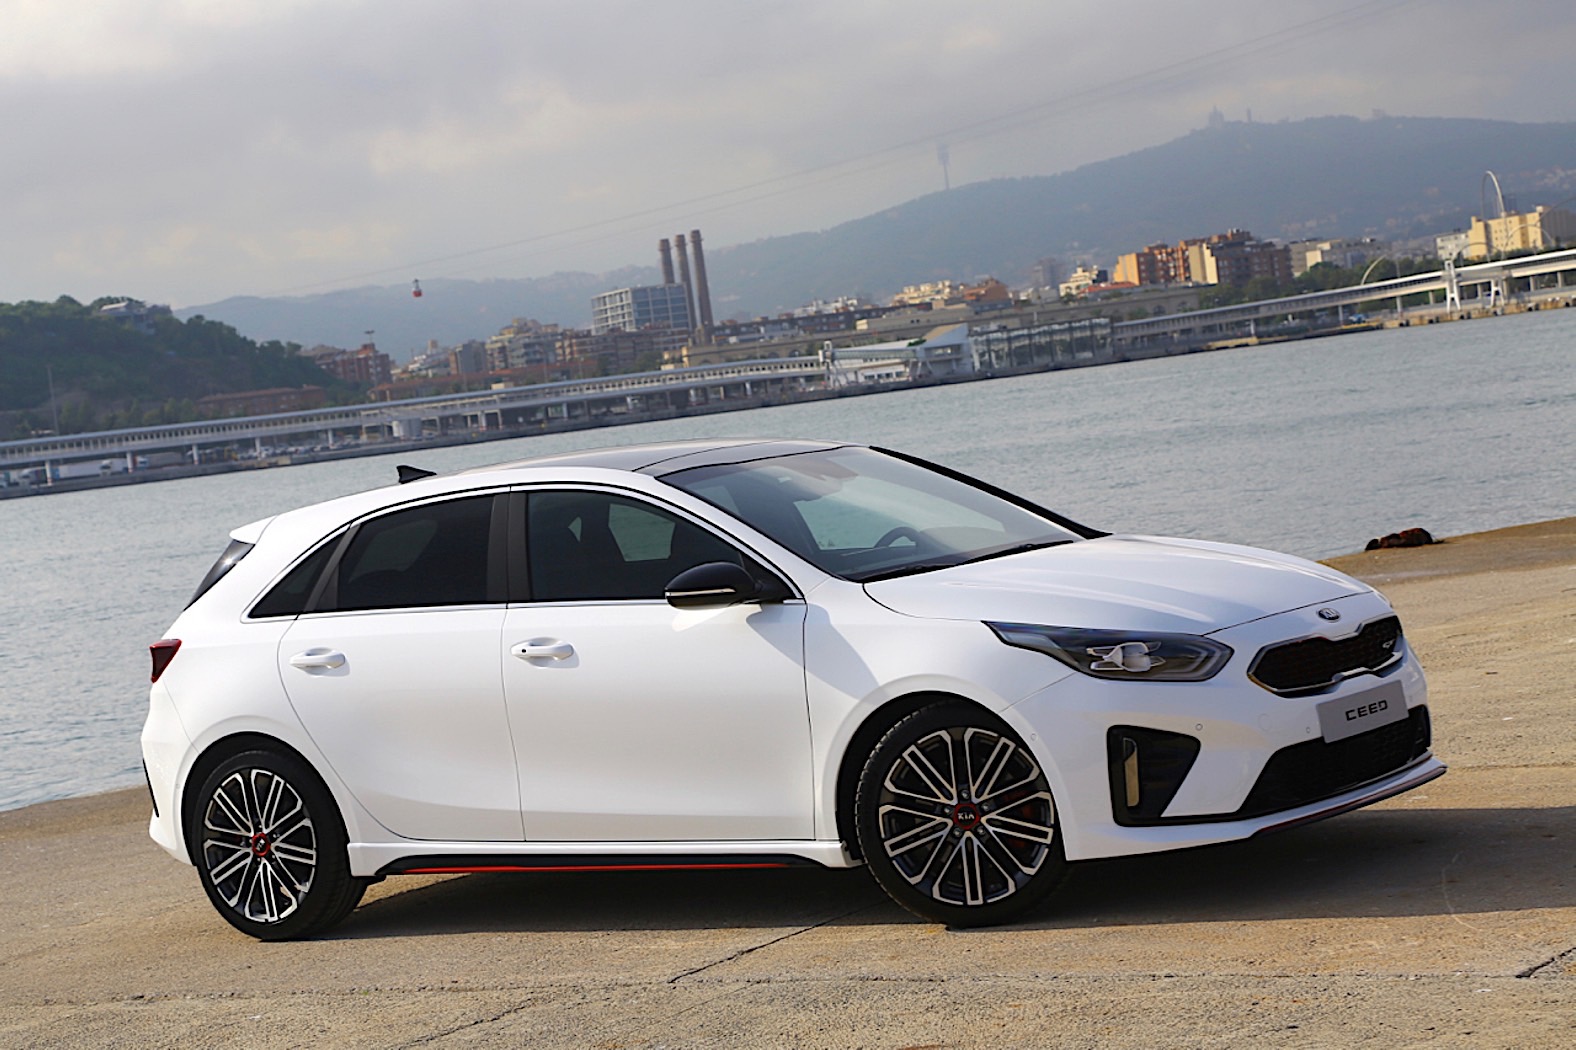 UK-Spec Kia Ceed GT Priced from 25,535 Pounds - autoevolution